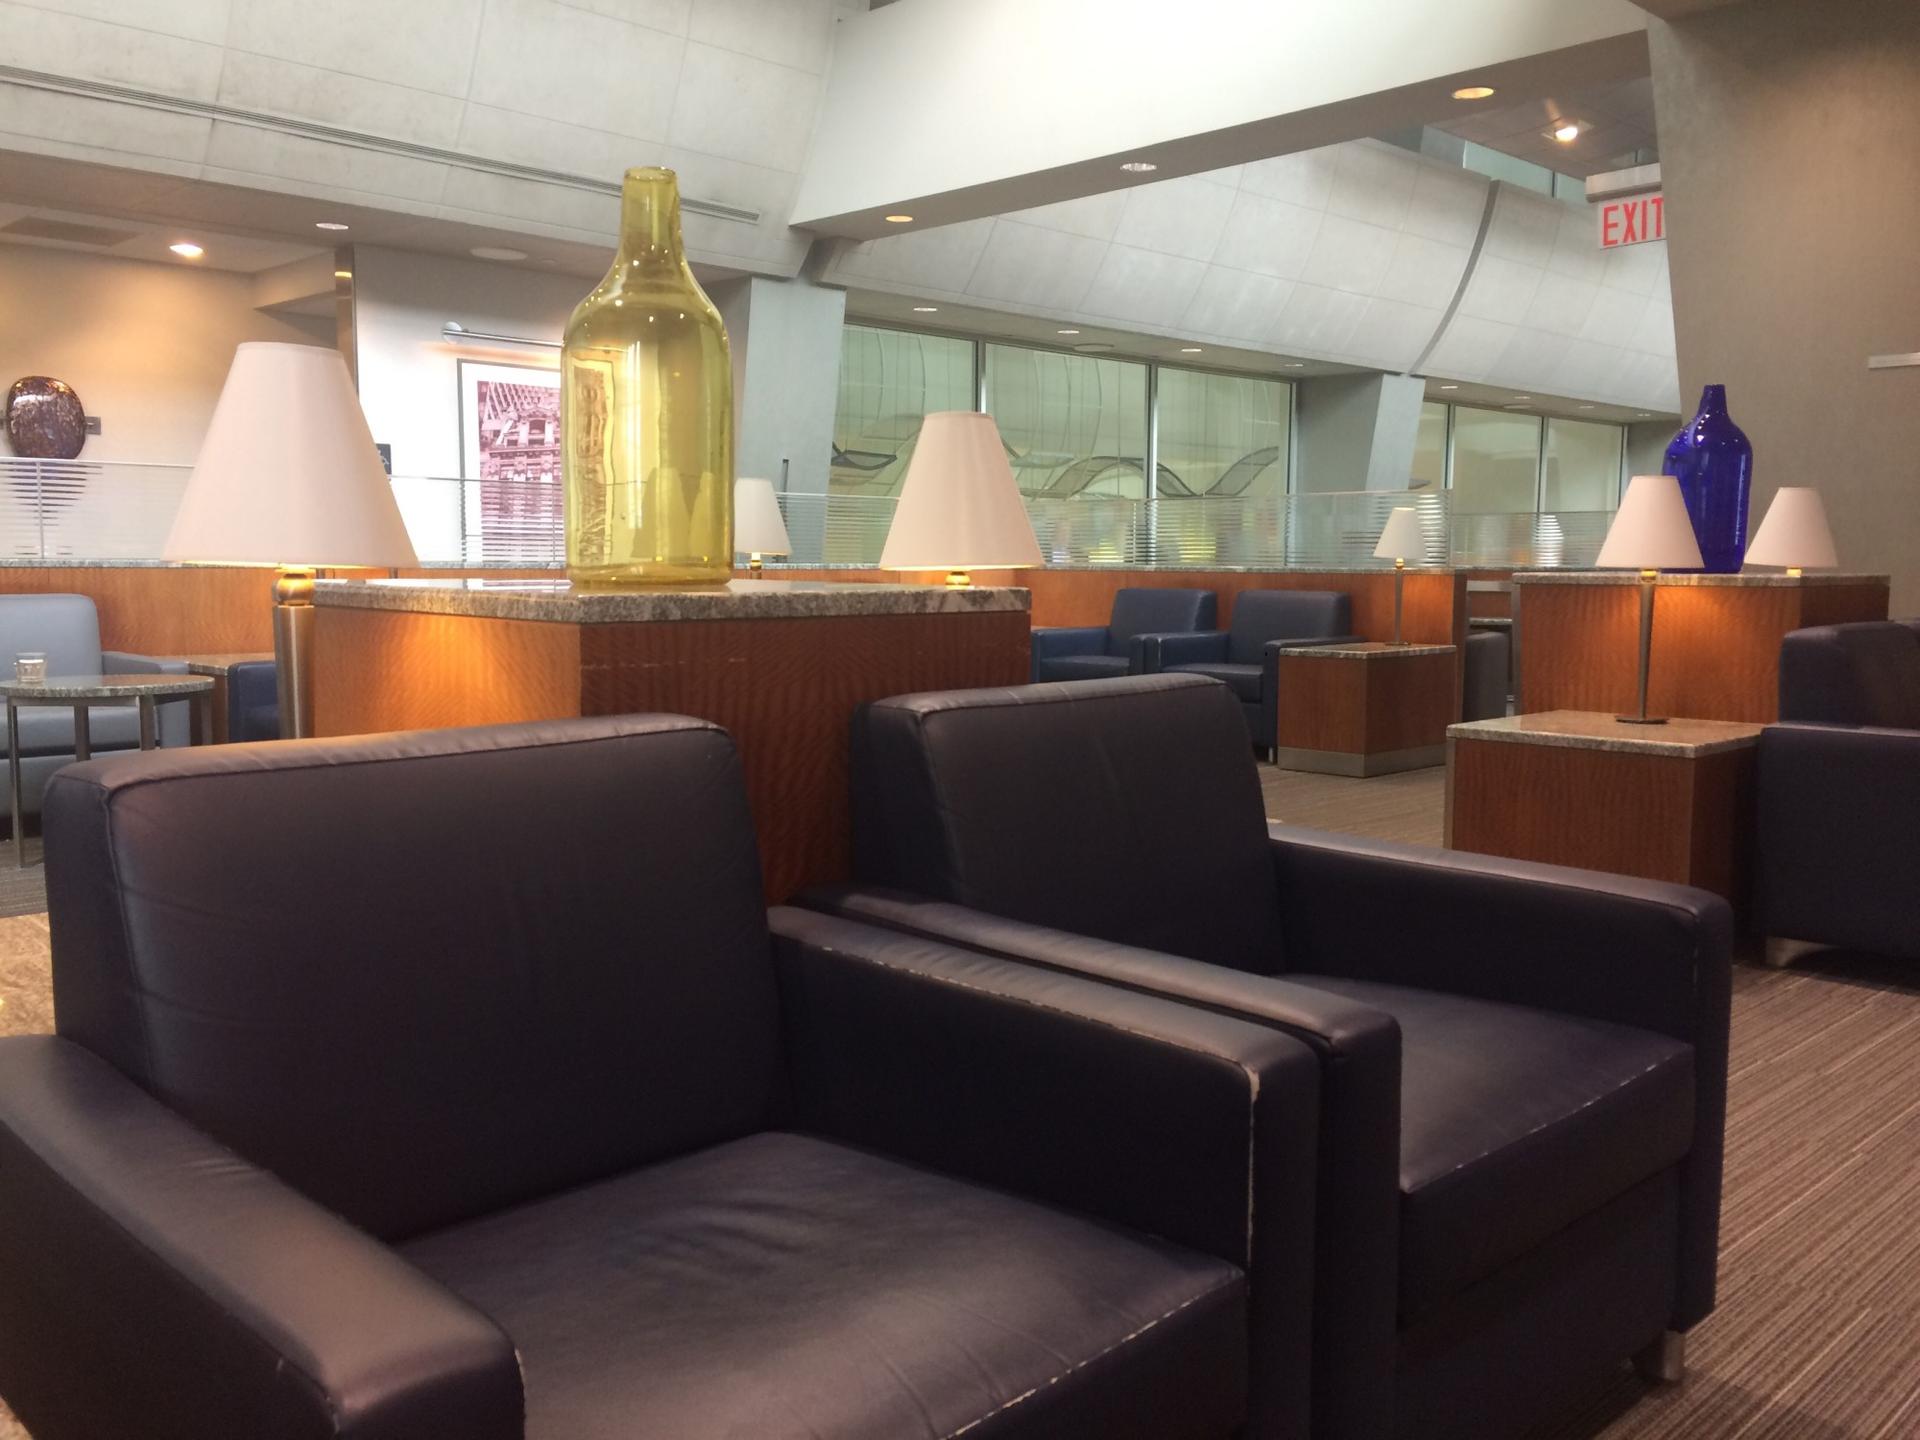 American Airlines Admirals Club image 46 of 48